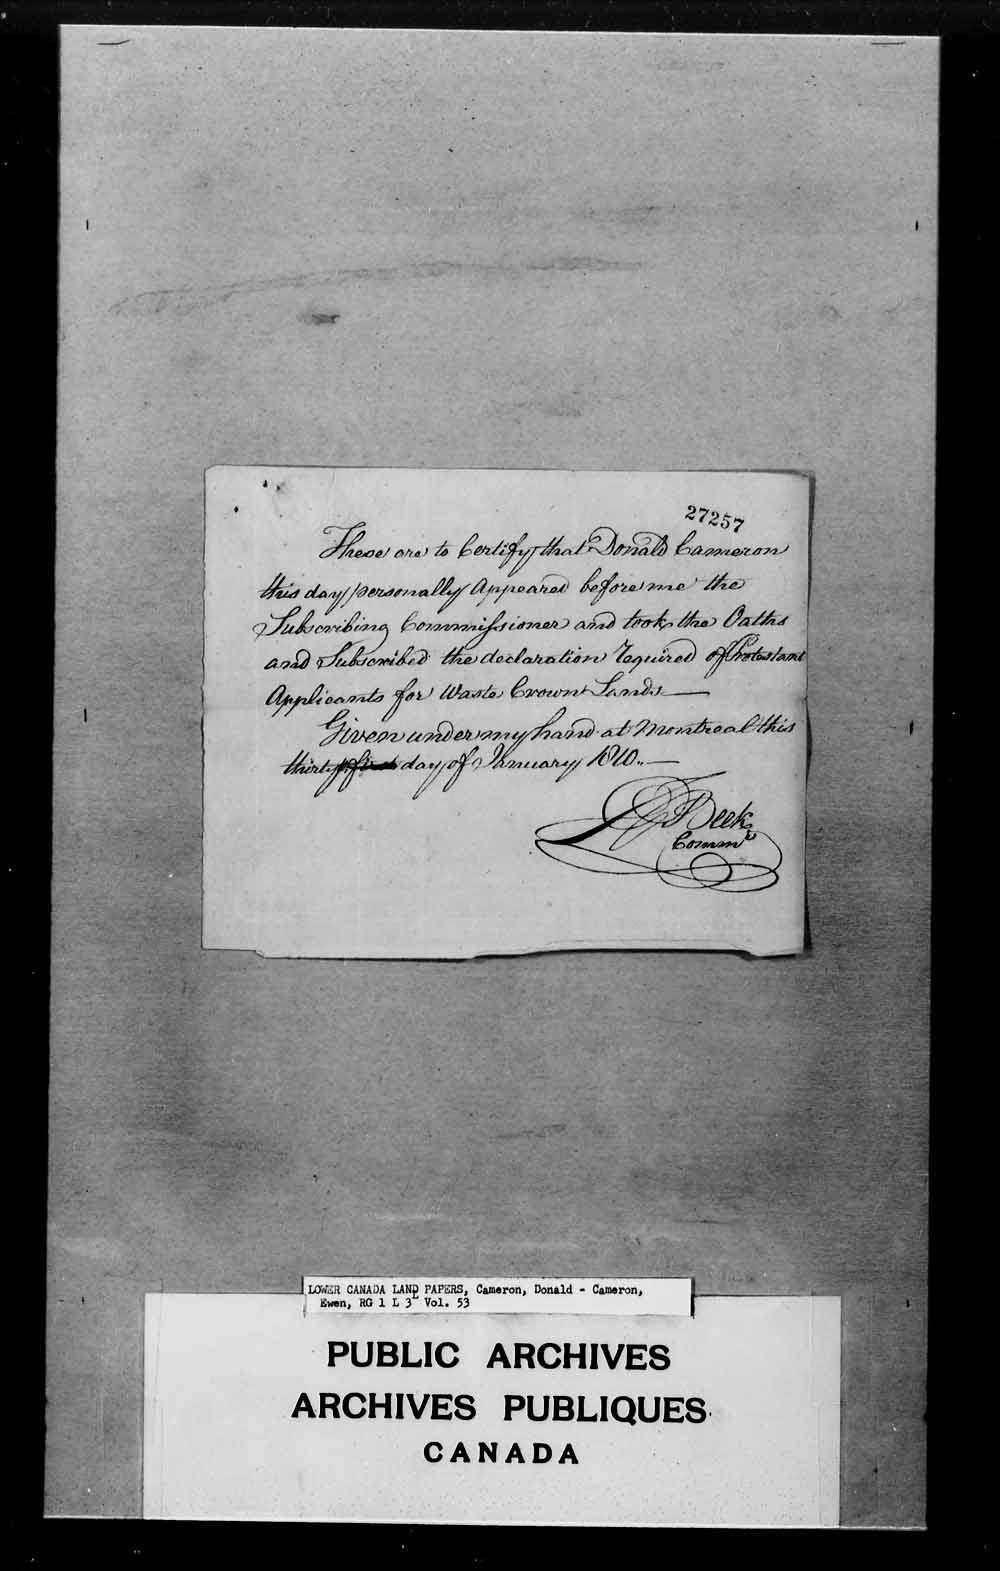 Digitized page of  for Image No.: e006611637